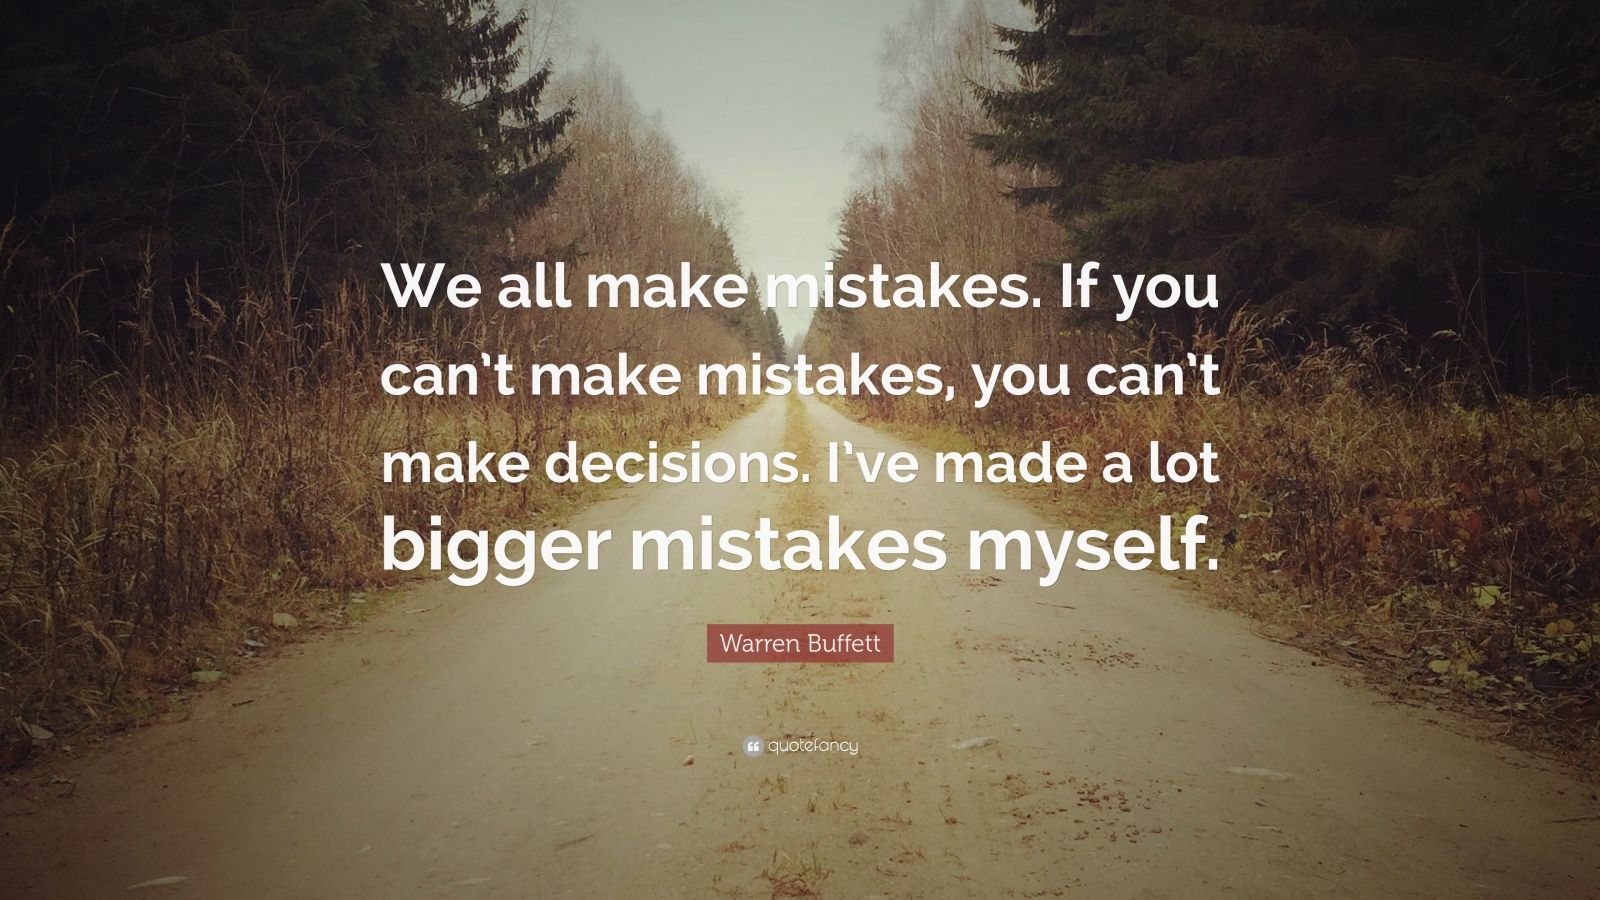 Mistake Quotes (40 wallpapers) Quotefancy